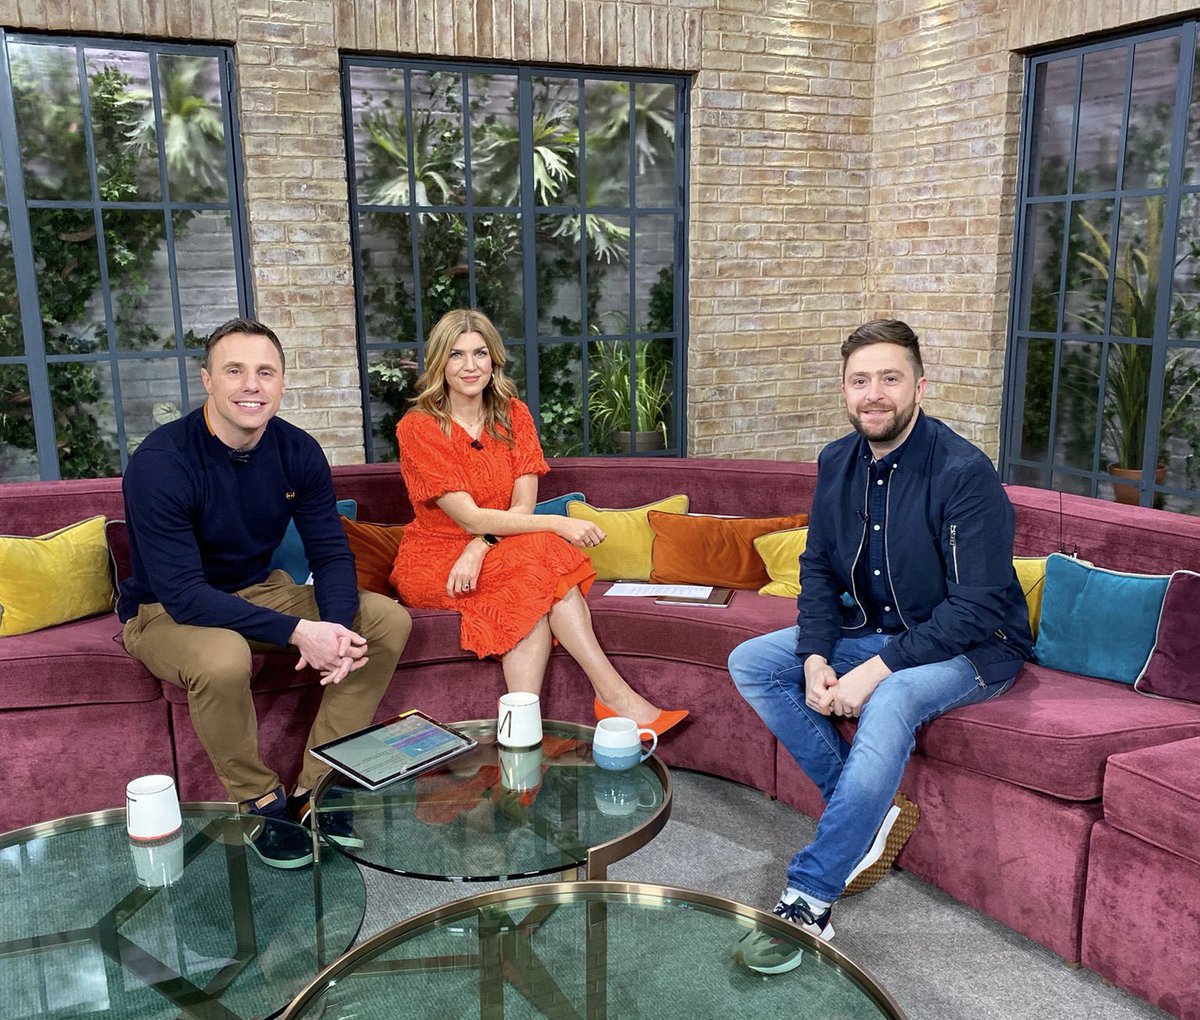 🎭GEORGE MCMAHON🎭

From Fair City to family life, actor @georgeymac joins us for a catch up

#IrelandAM